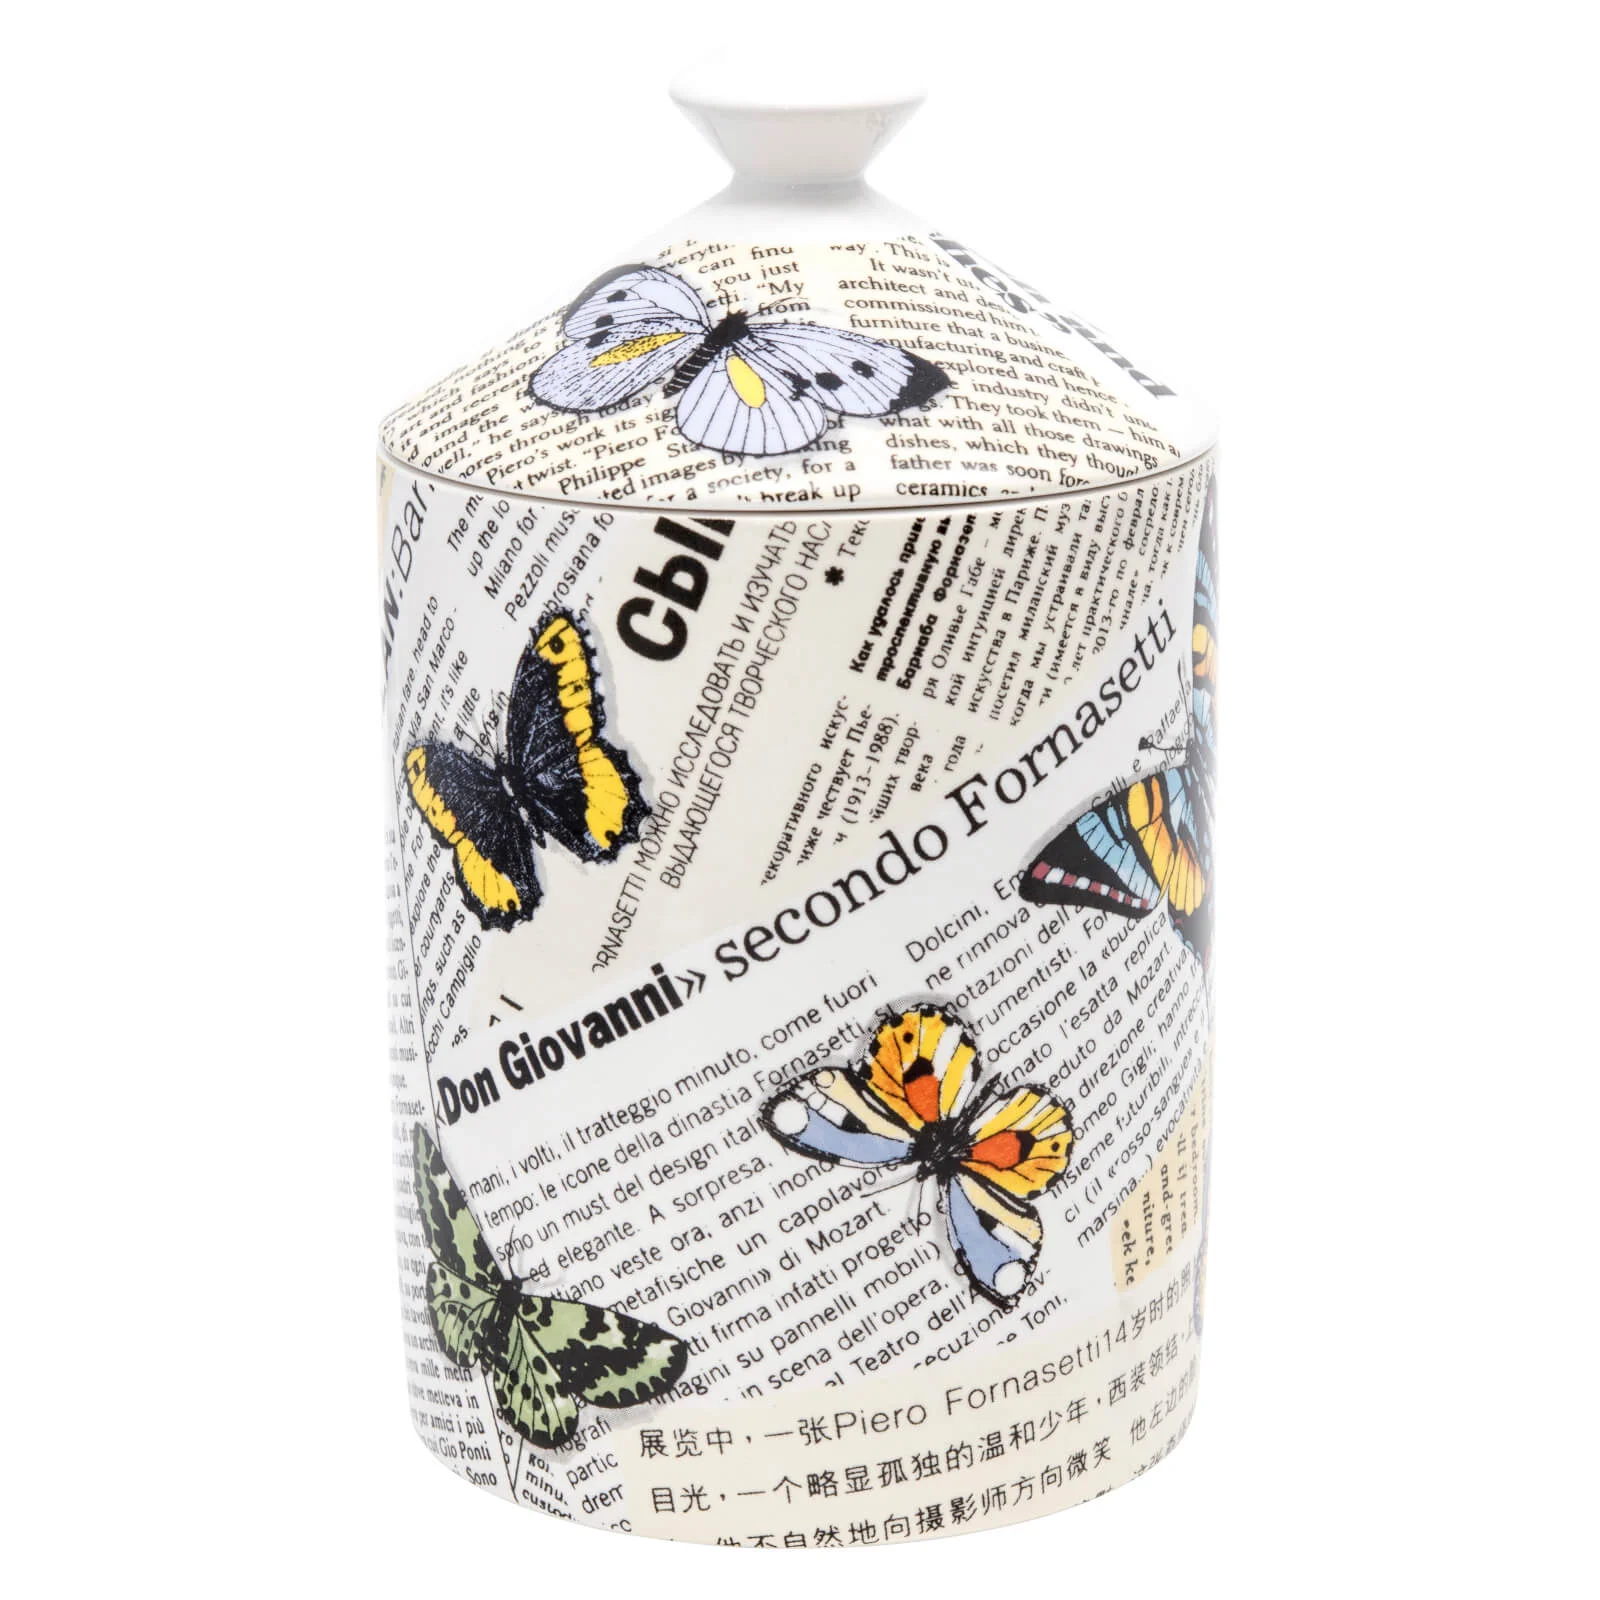 Fornasetti Ultime Notizie Scented Candle 300g Image 1